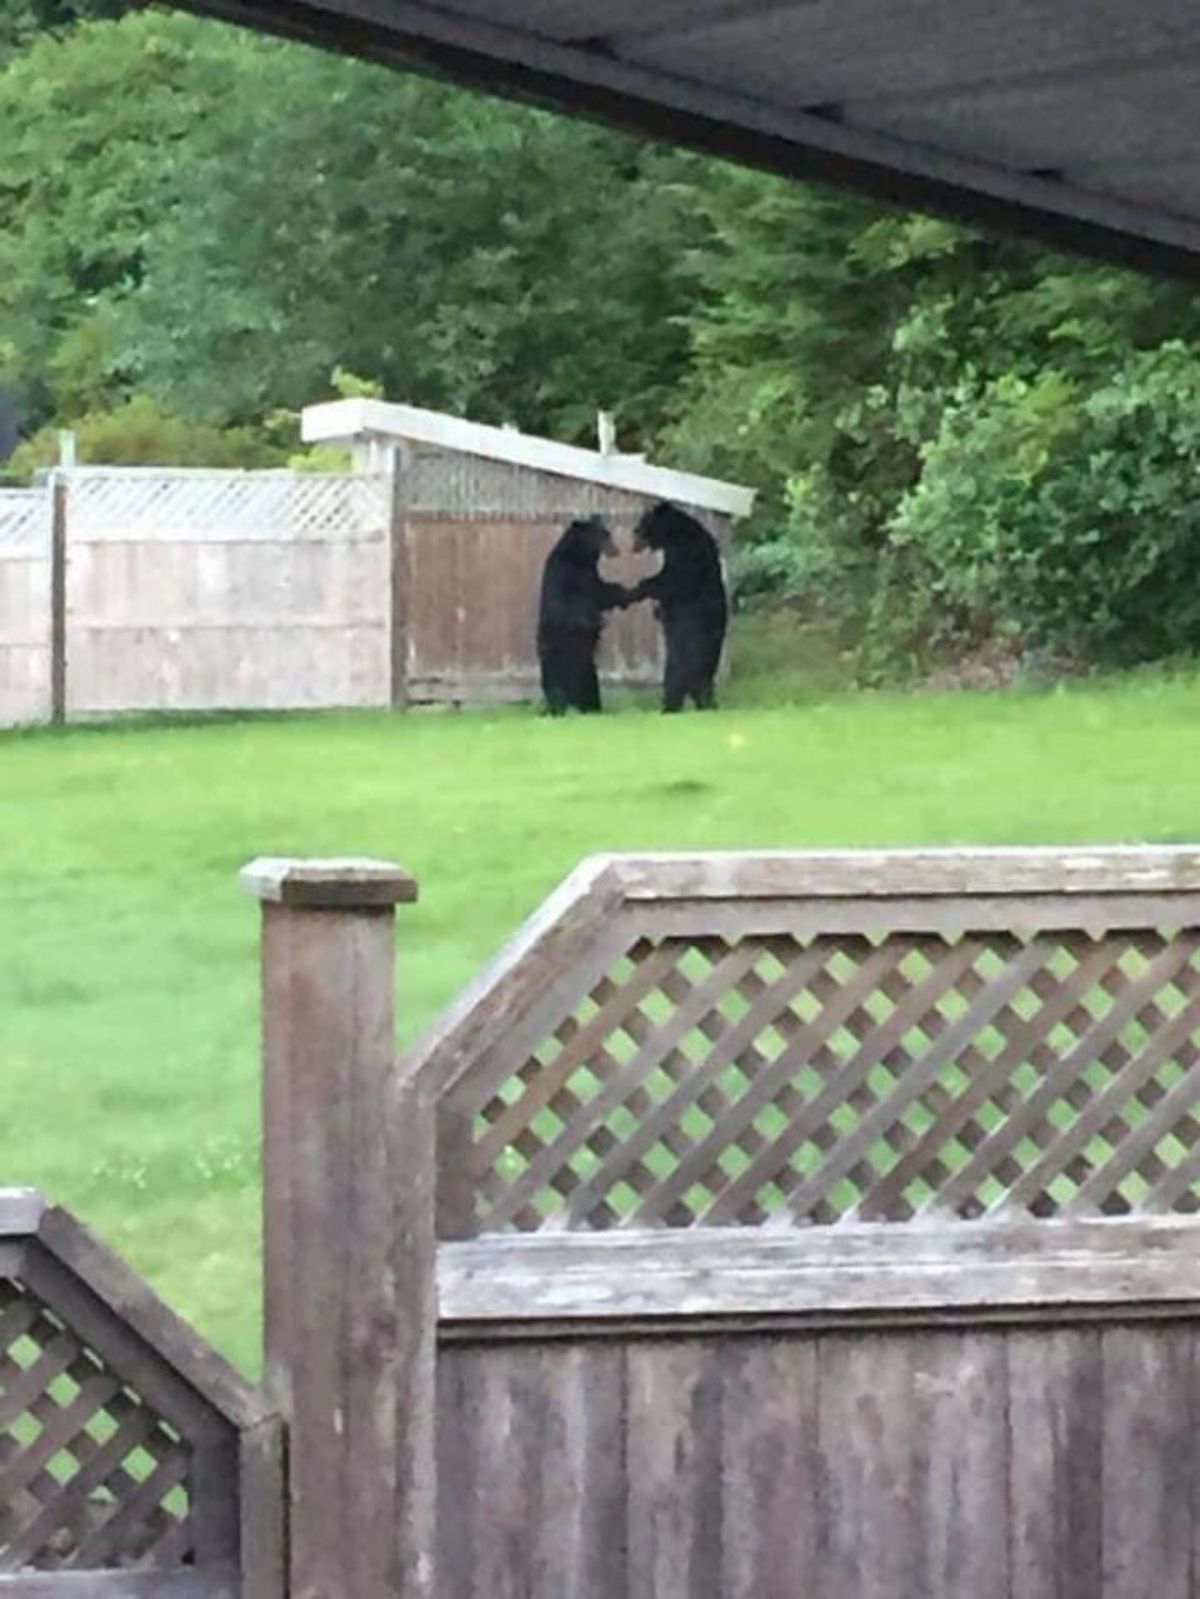 2 adult black bears standing on their hind legs and holding front paws together by a fence